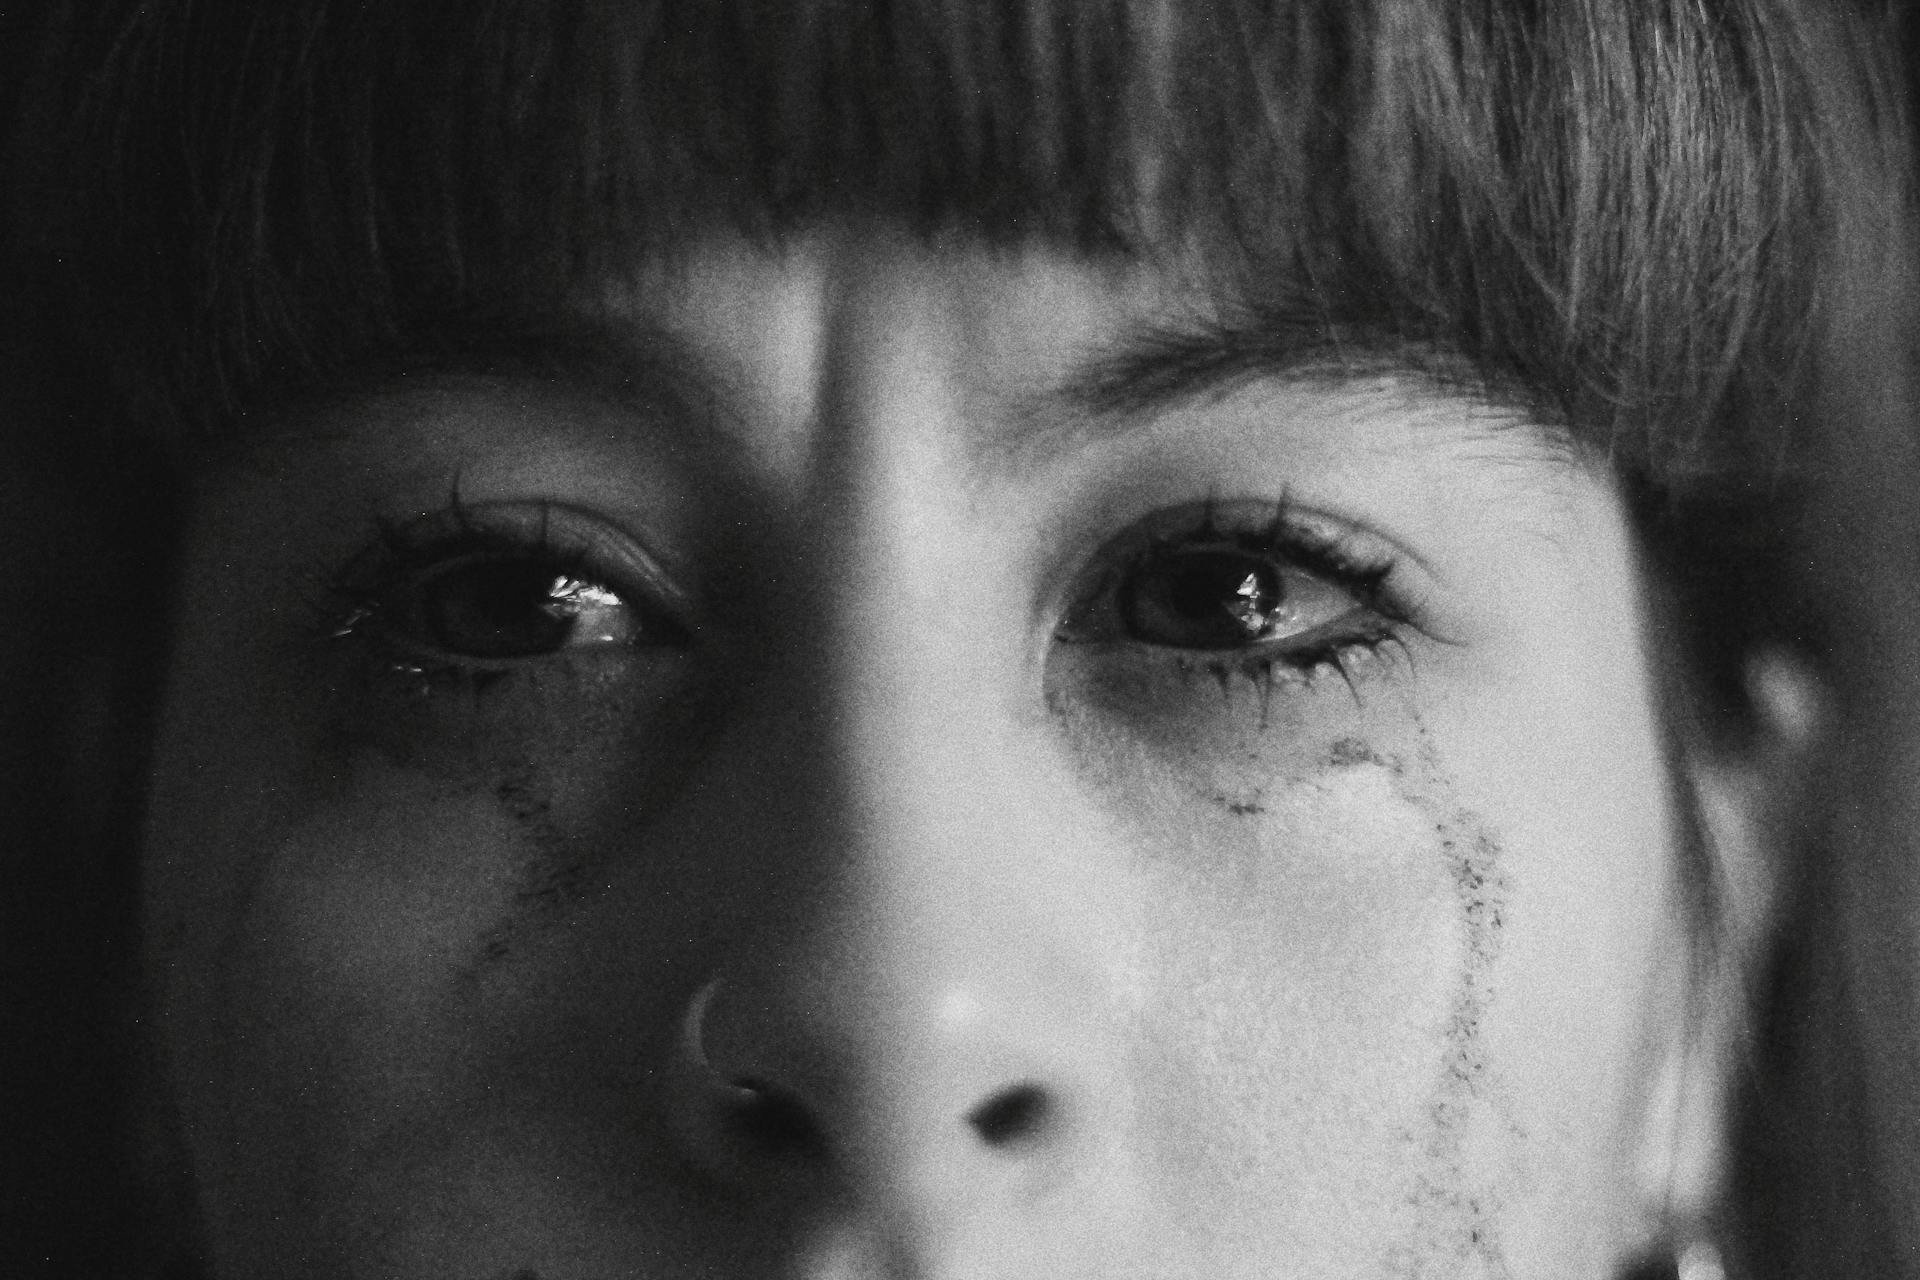 Close up of a crying woman's face | Source: Pexels